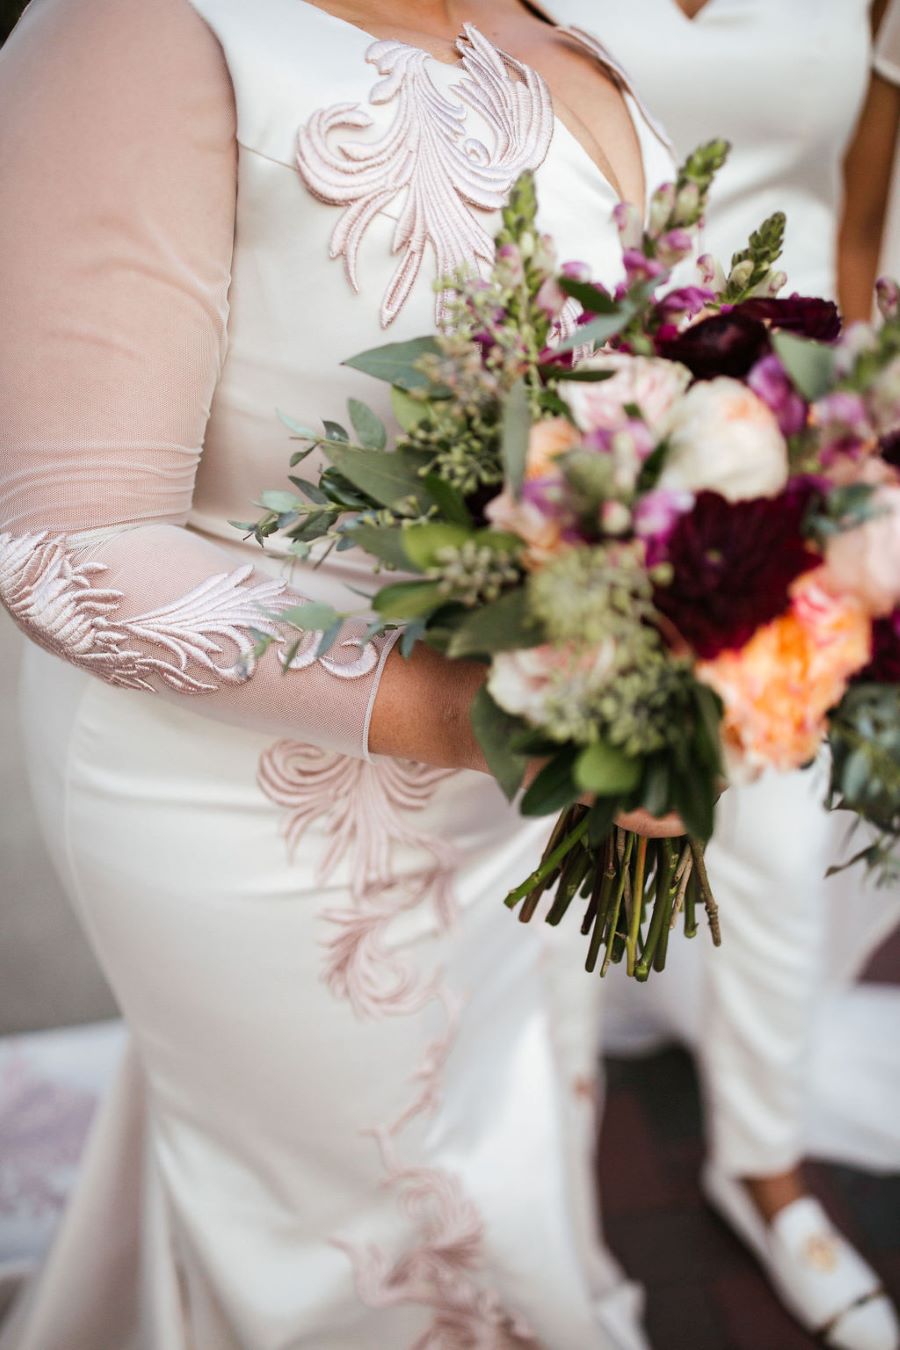 Close up of bride's long sleeve dress details and bouquet / romantic lgbtq / fall / September / blush / burgundy